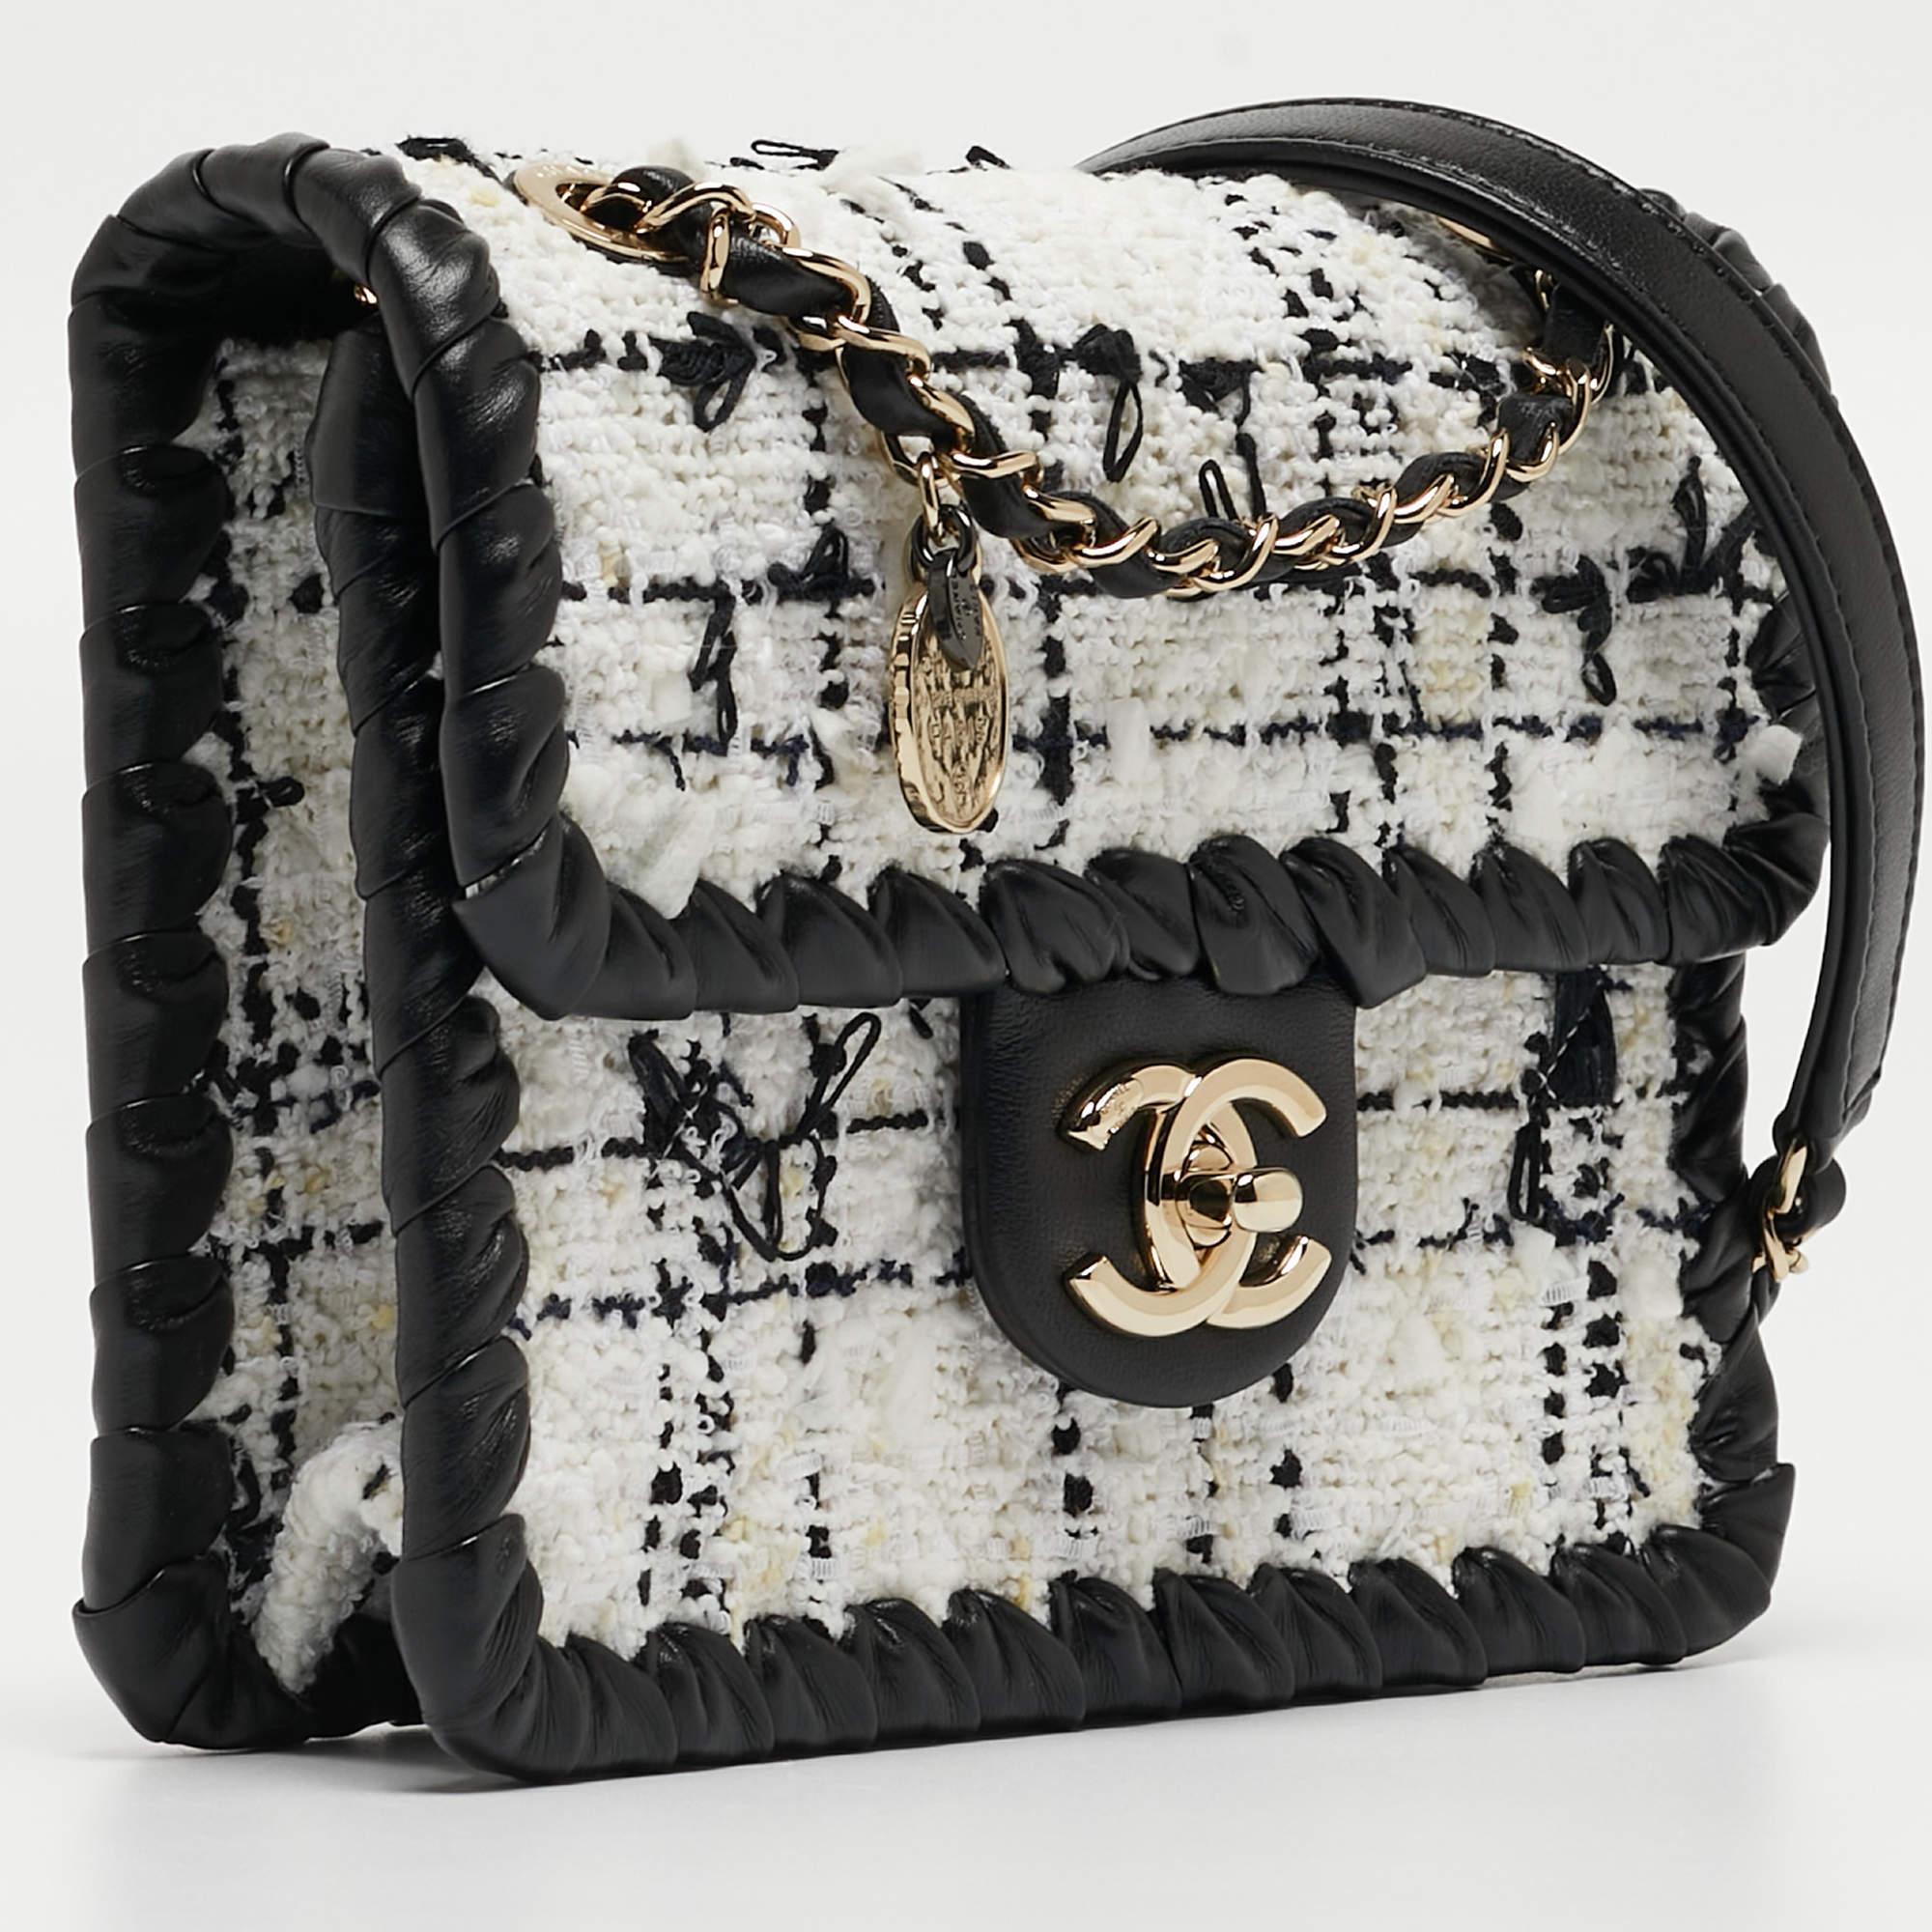 Chanel Black/White Tweed and Leather Mini My Own Frame Flap Bag 7